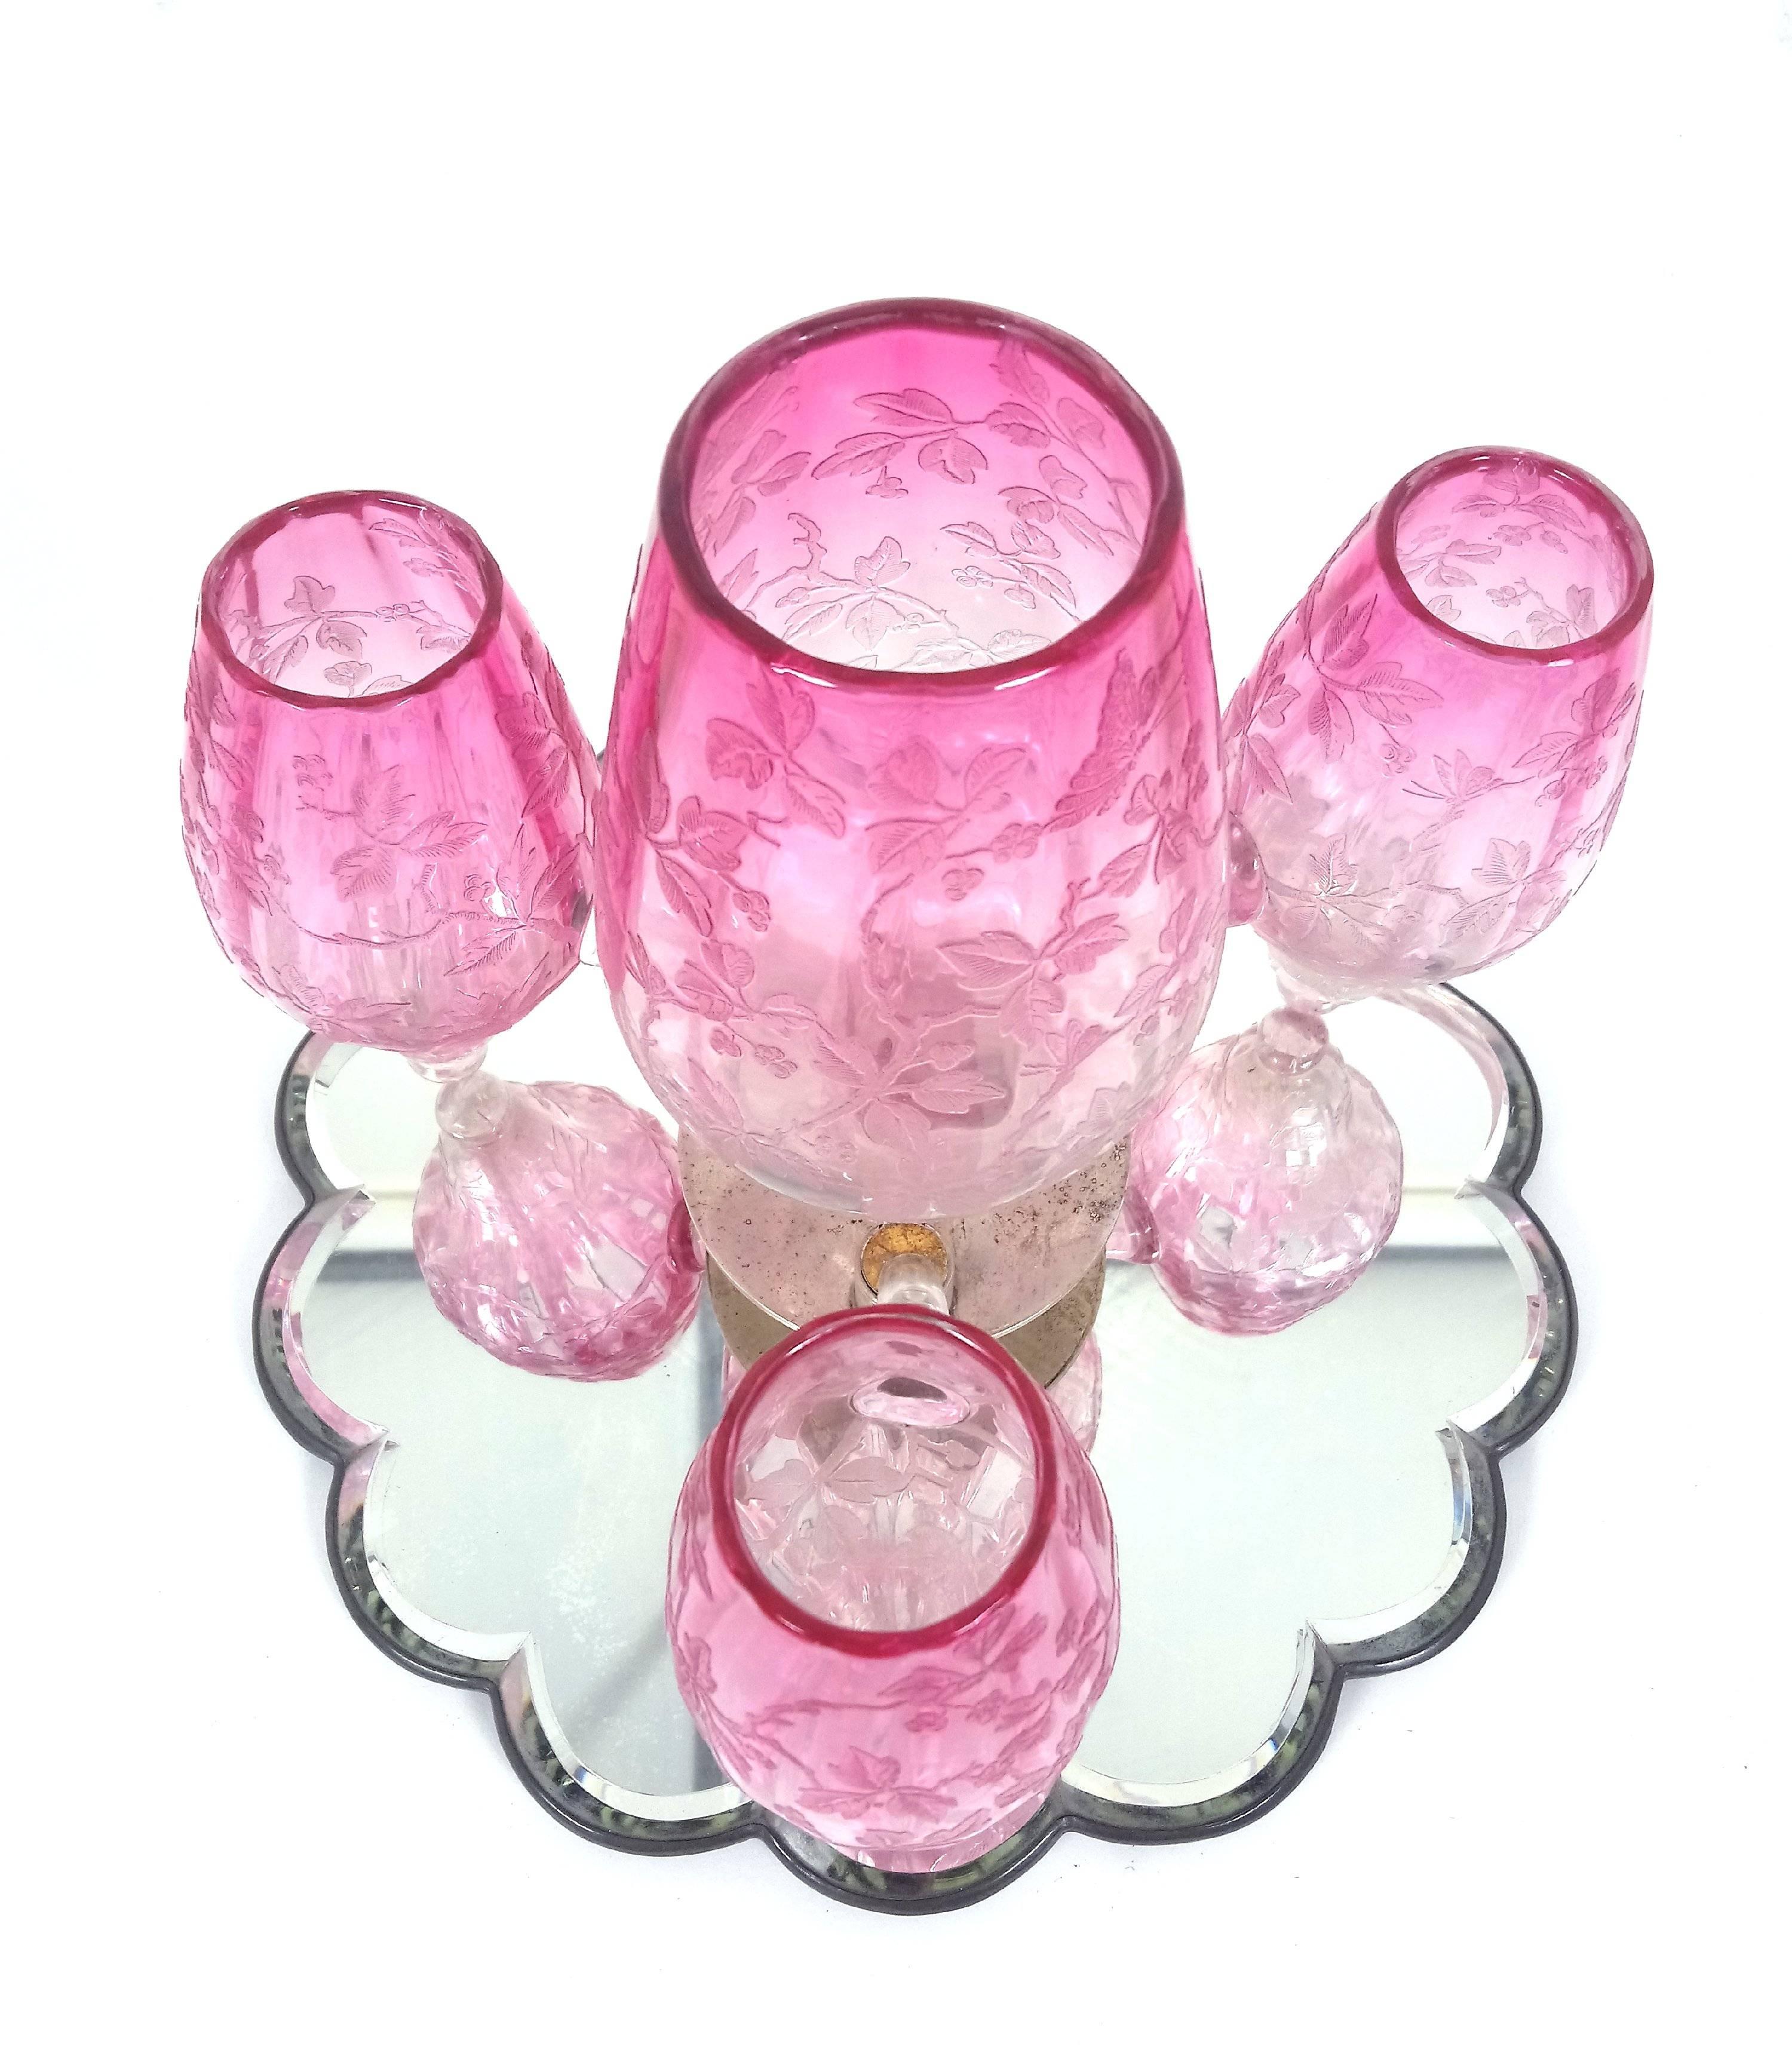 This lovely Victorian engraved cranberry glass four-light revolving table centrepiece has a shaped bevelled mirrored base and features an intricate and delicate design of flowers and trailing leaves. The three smaller glasses are removable so the